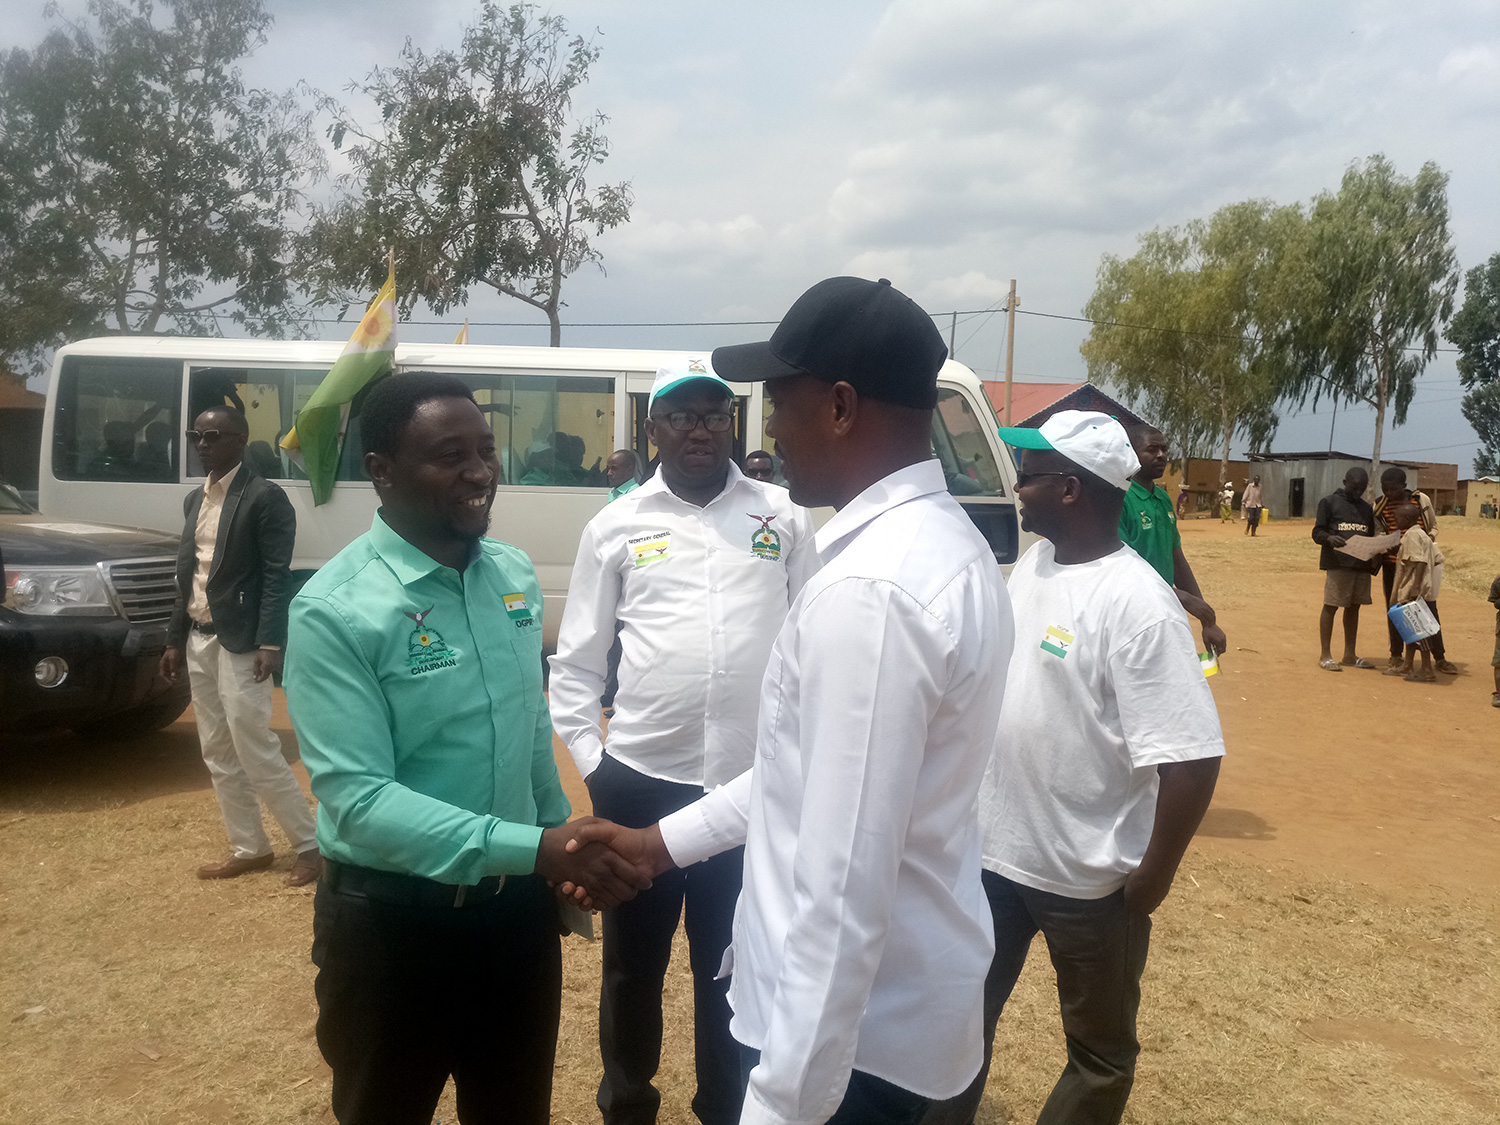 A local leader welcomes Frank Habineza and Green Party members before their campaign in Rwimiyaga Sector, Nyagatare District on Monday. Jean du2019Amour Mbonyinshuti.